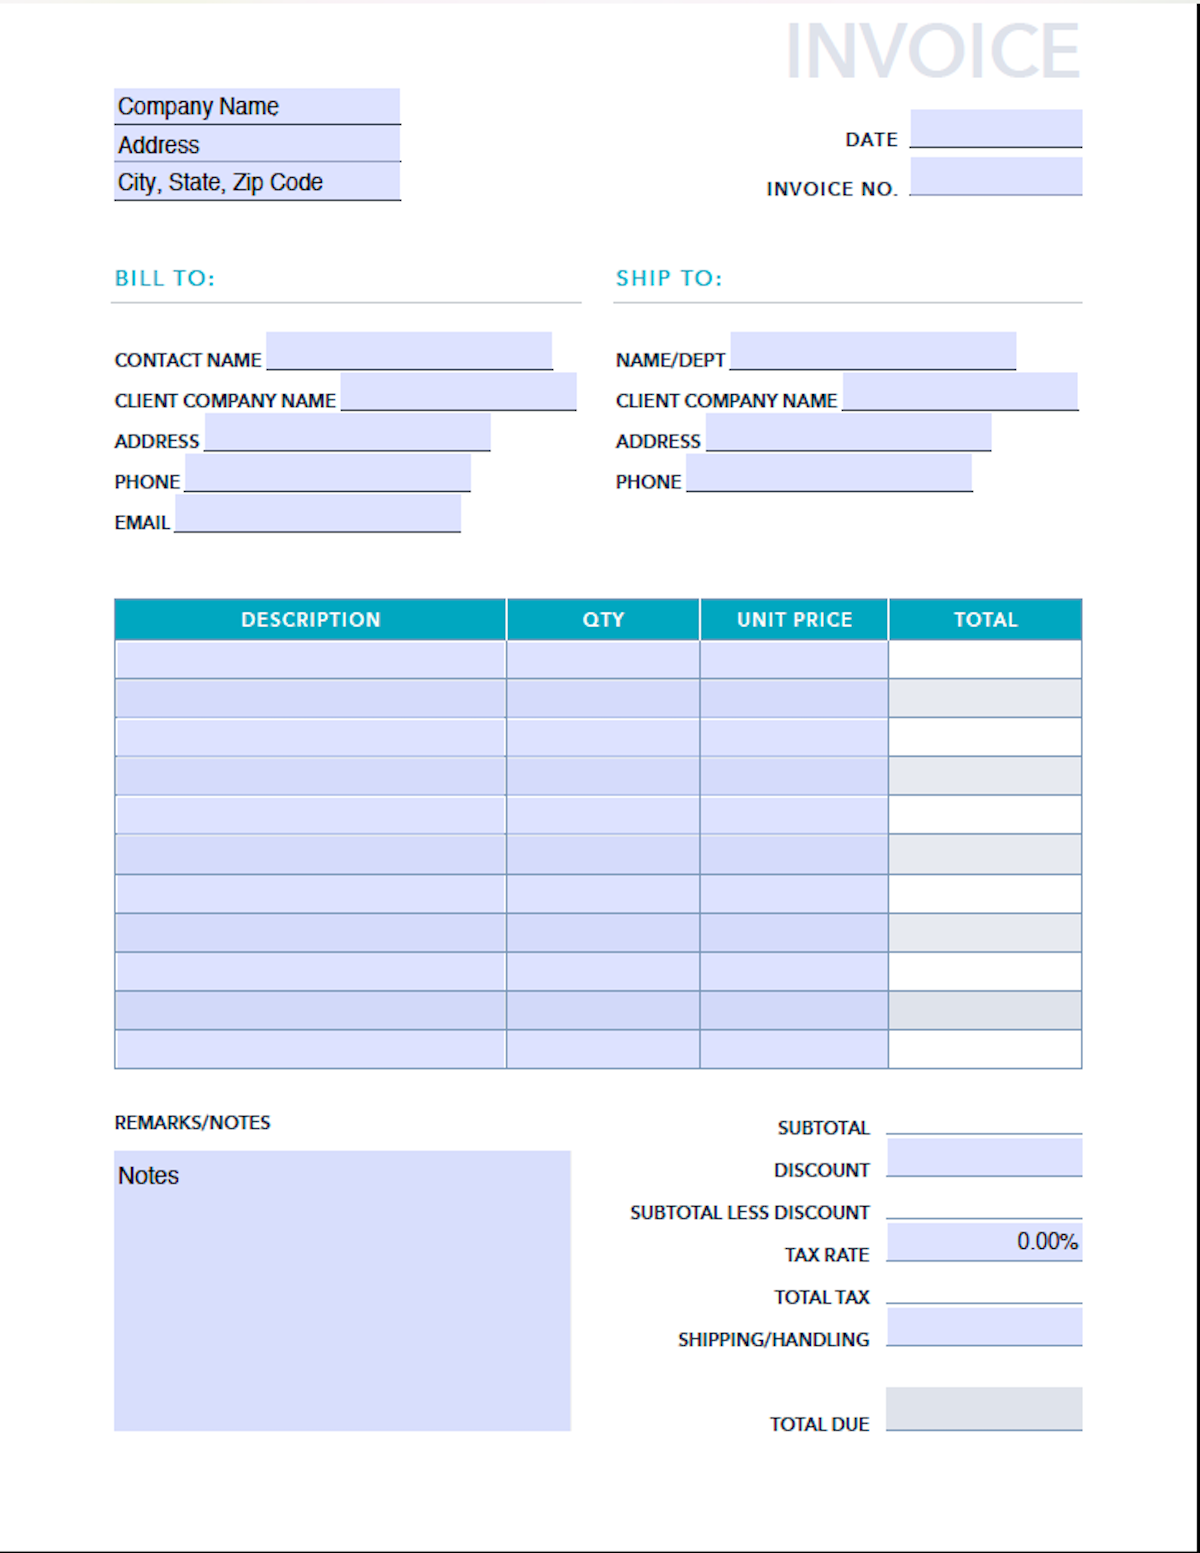 Free Excel Business Template from f.hubspotusercontent00.net